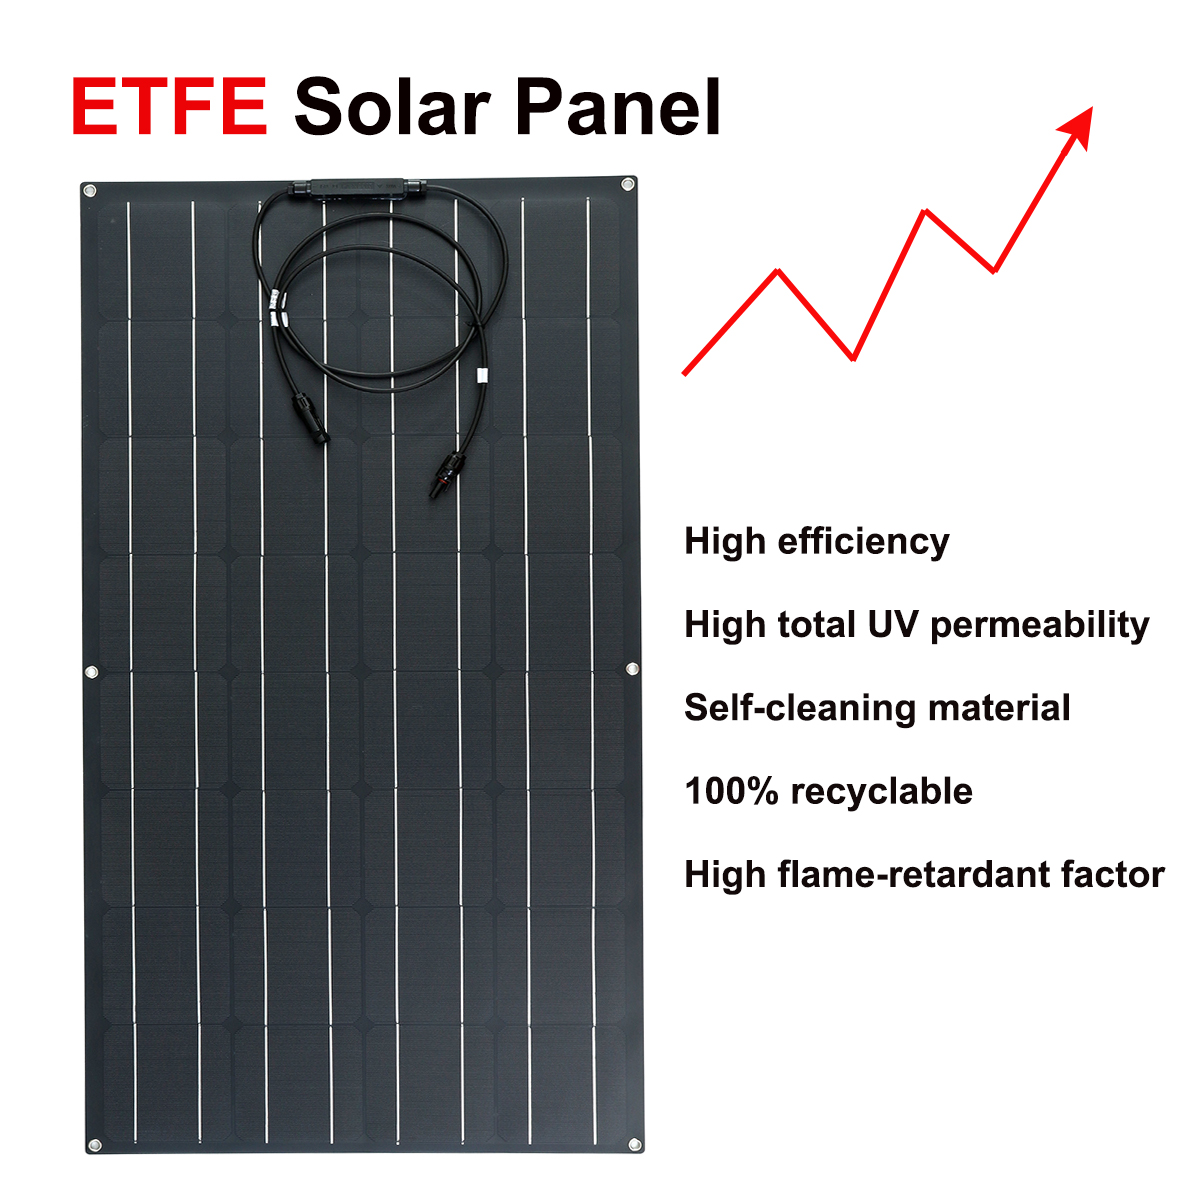 20W-ETFE-Solar-Panel-Field-Vehicles-Emergency-Charger-With-4-Protective-Corners-Single-USBDC-1616361-2